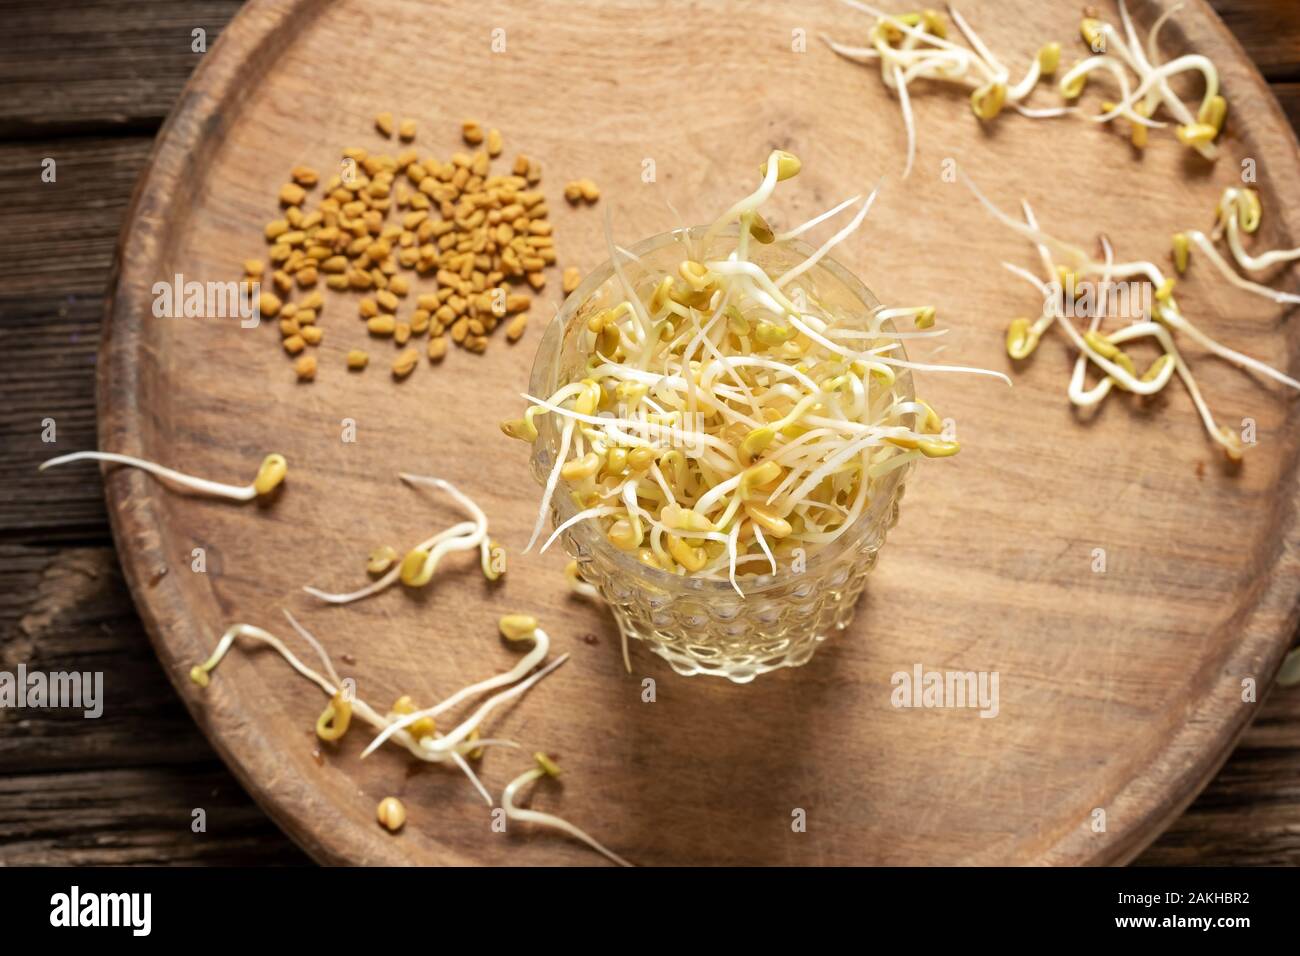 Fresh fenugreek sprouts with dry seeds in the background Stock Photo